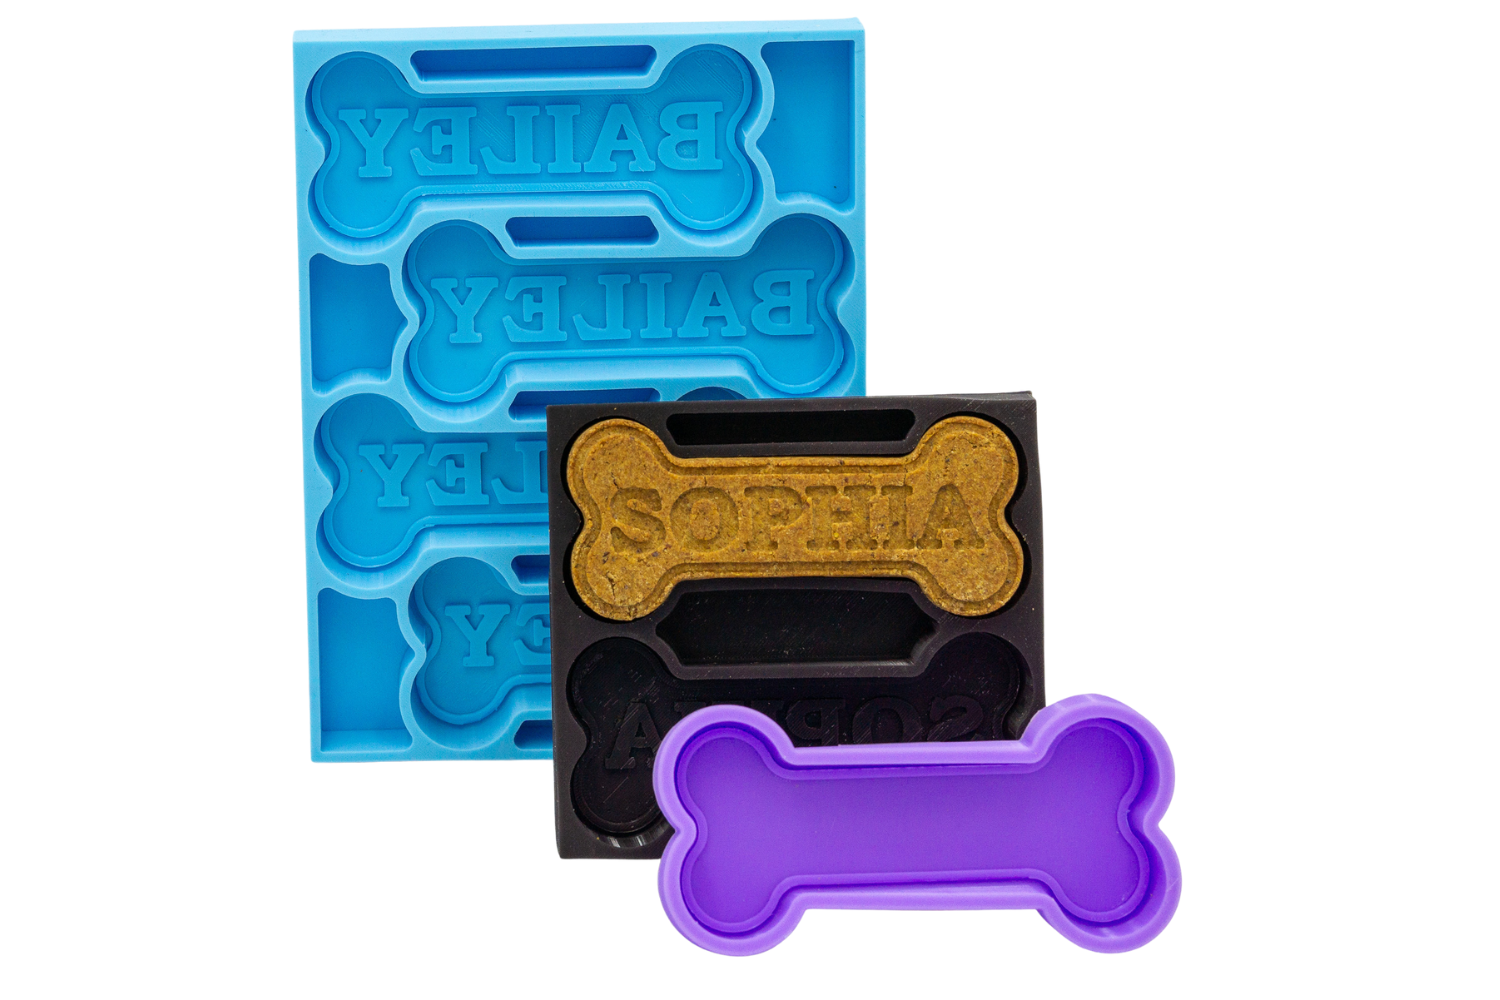 Small Dog Treat Molds, Puppy Silicone Mold